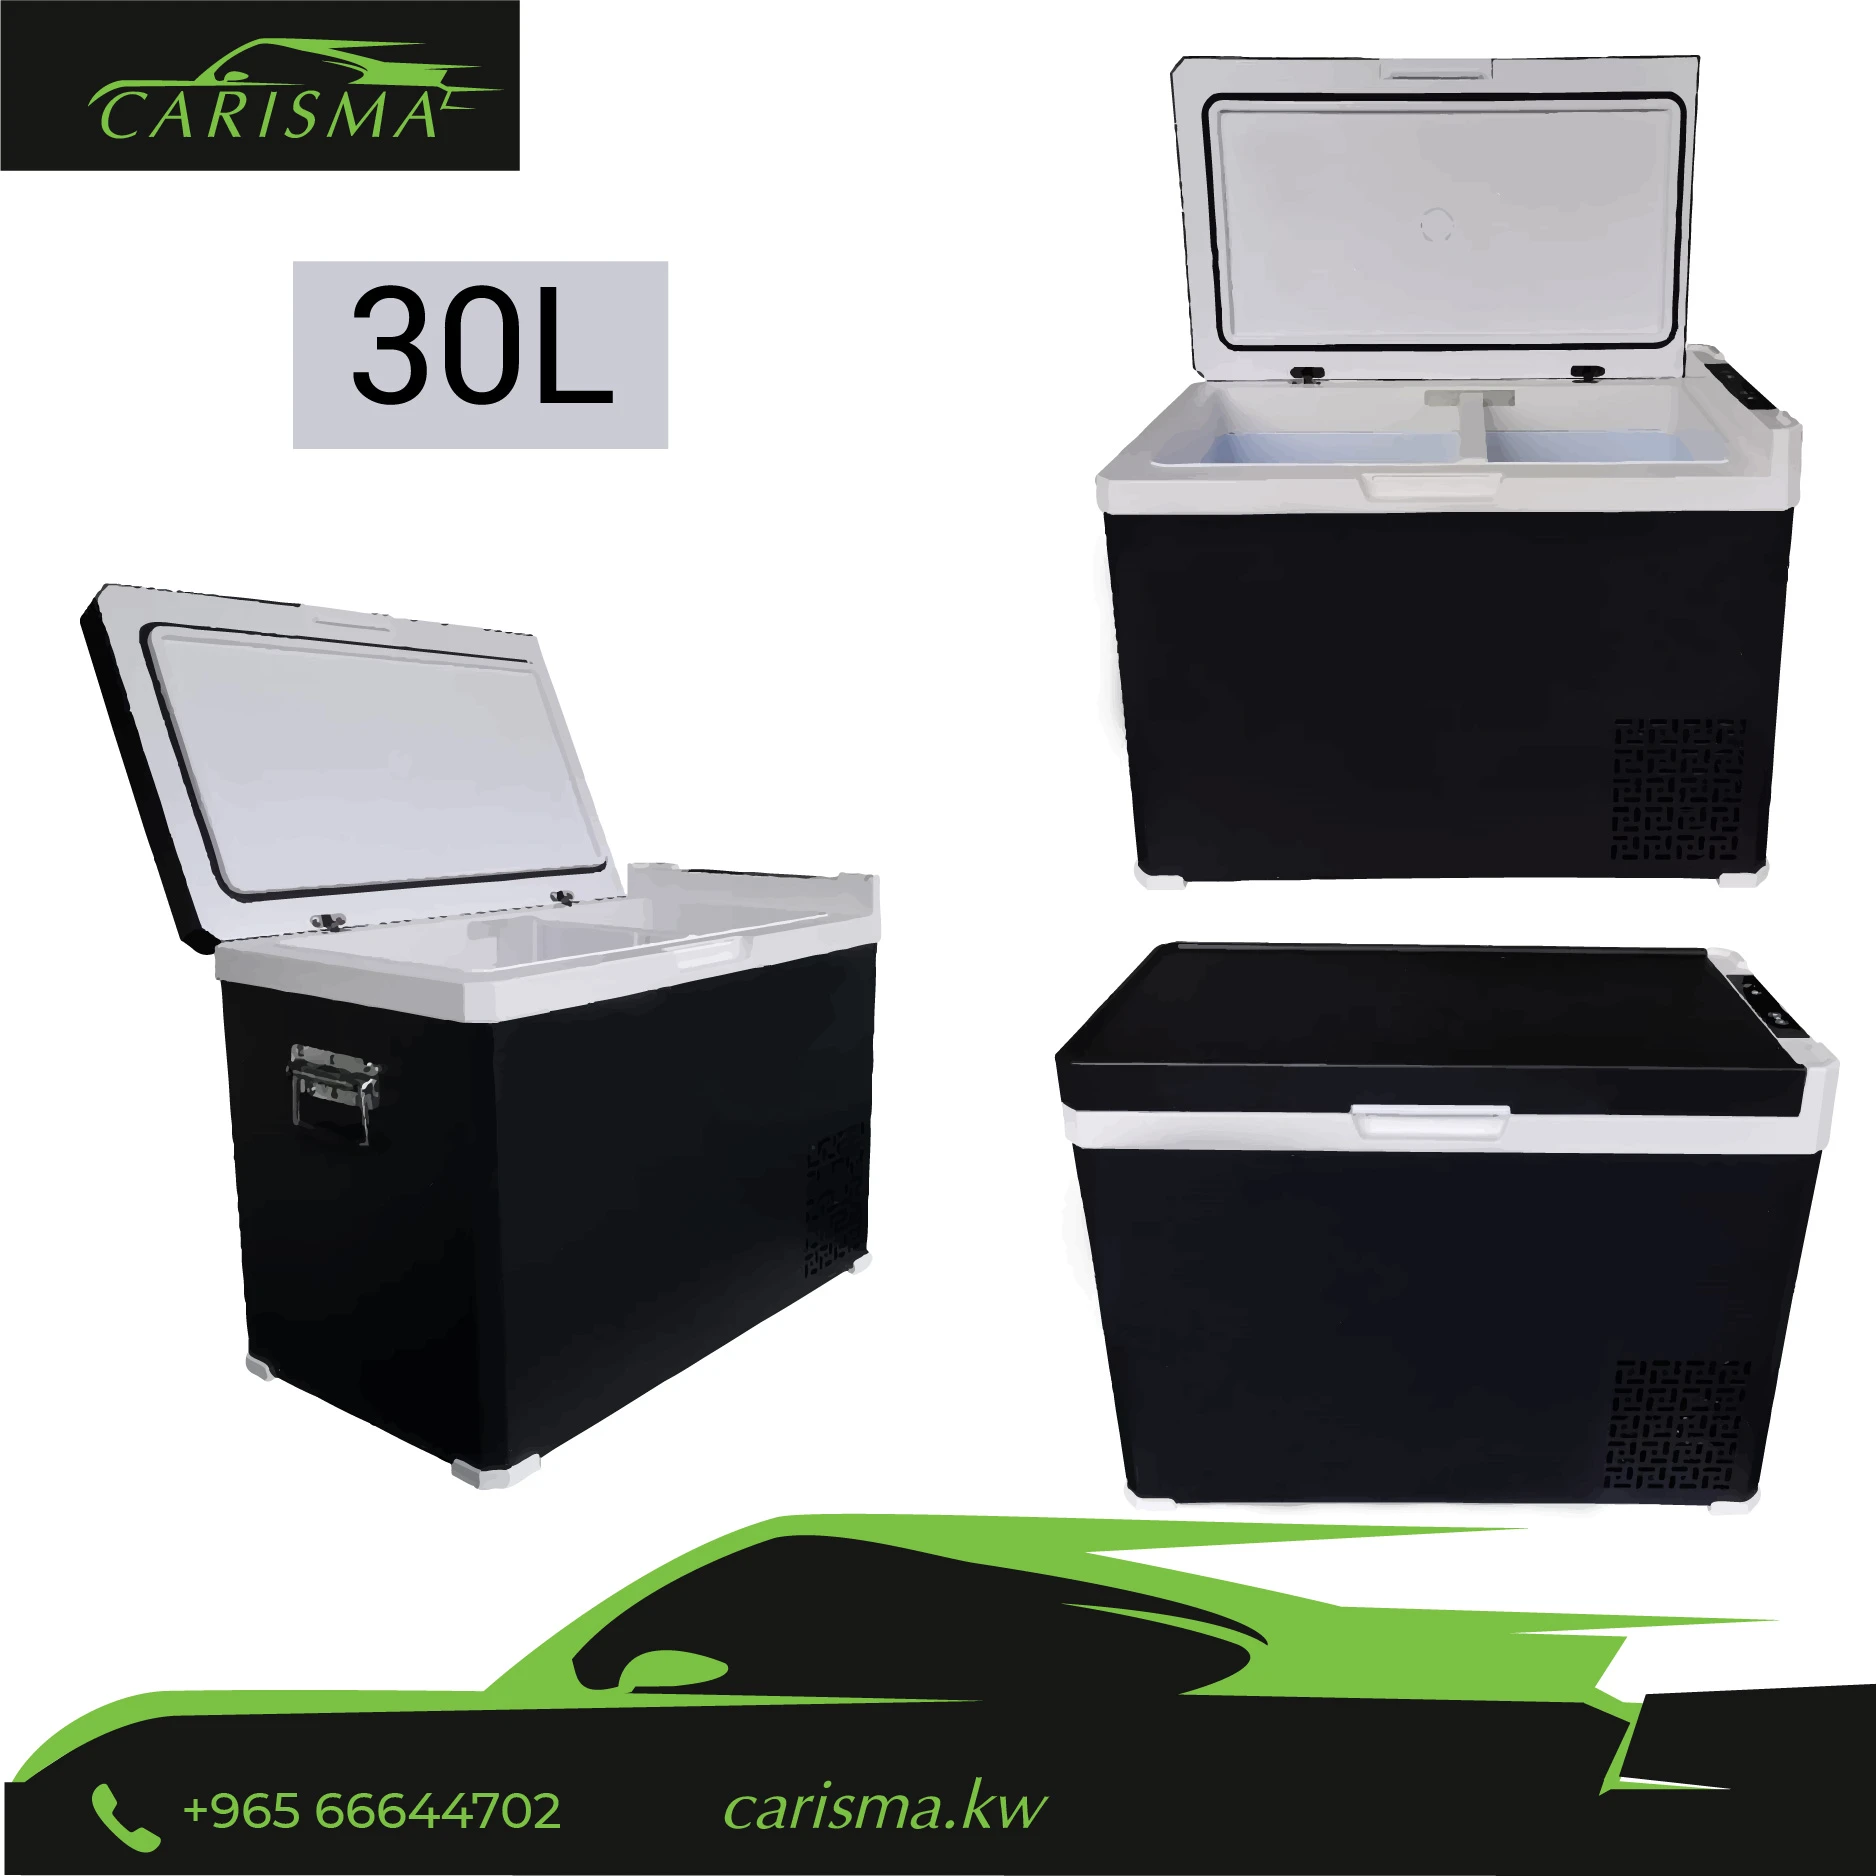 30L Refrigerator for Car and Home